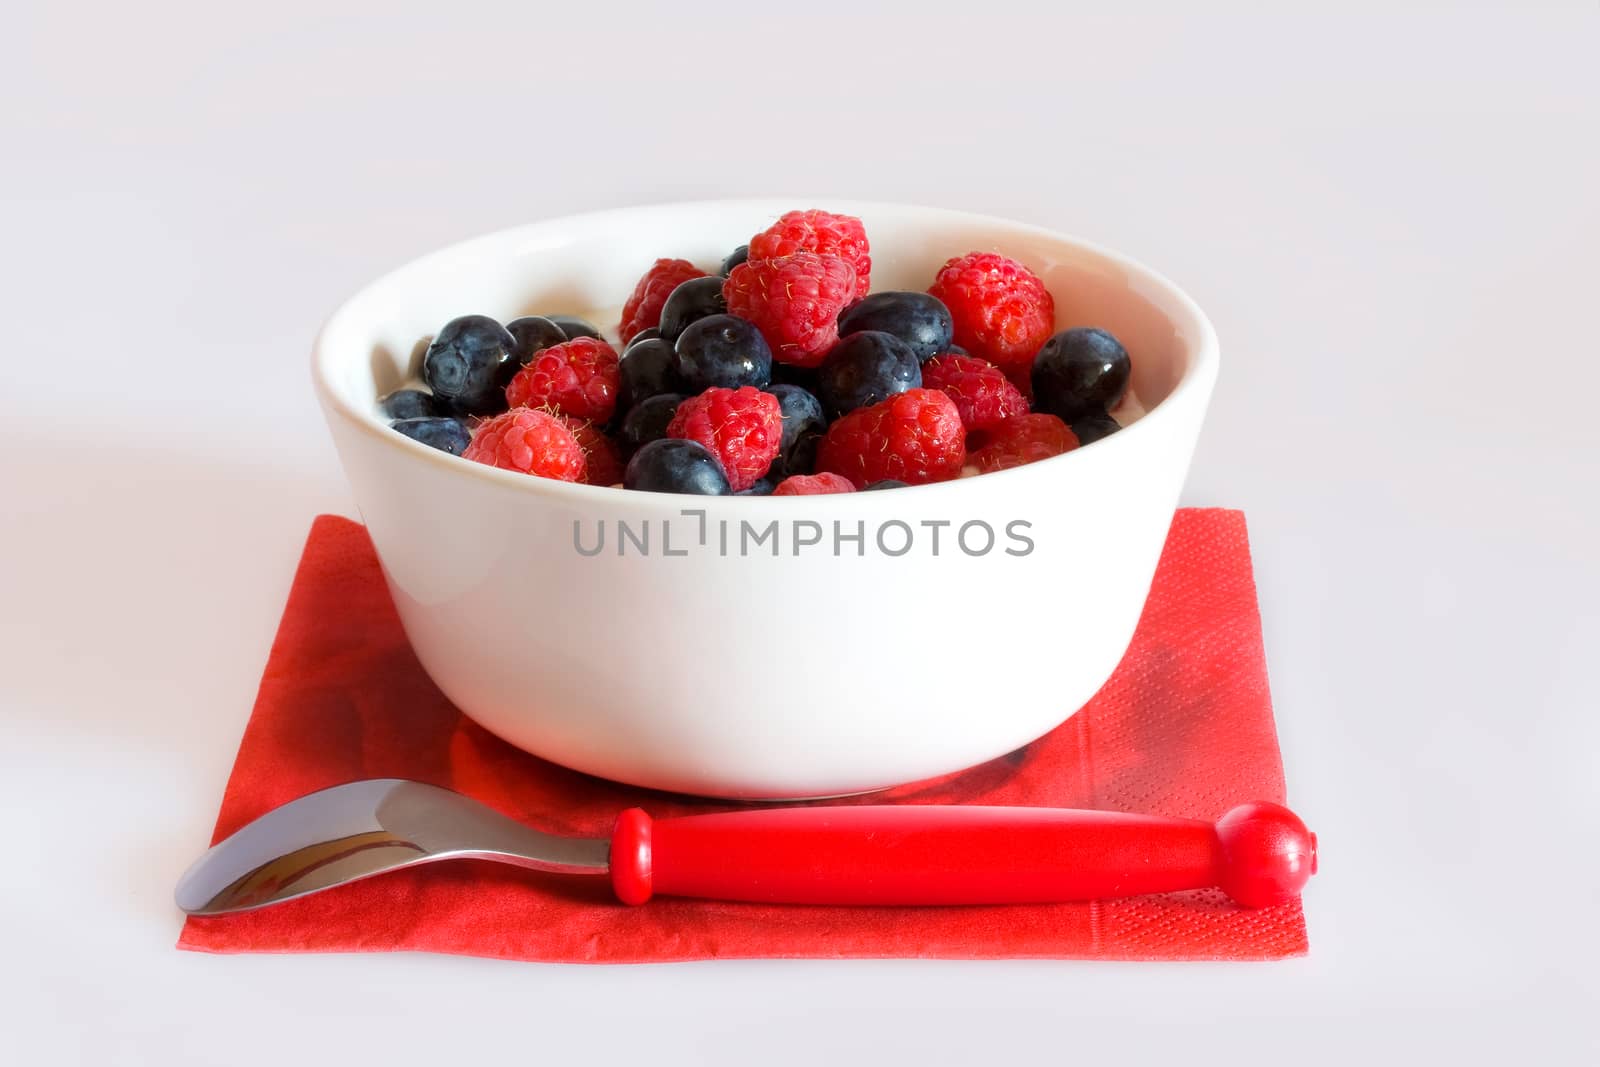 Bowl with berries on a white background